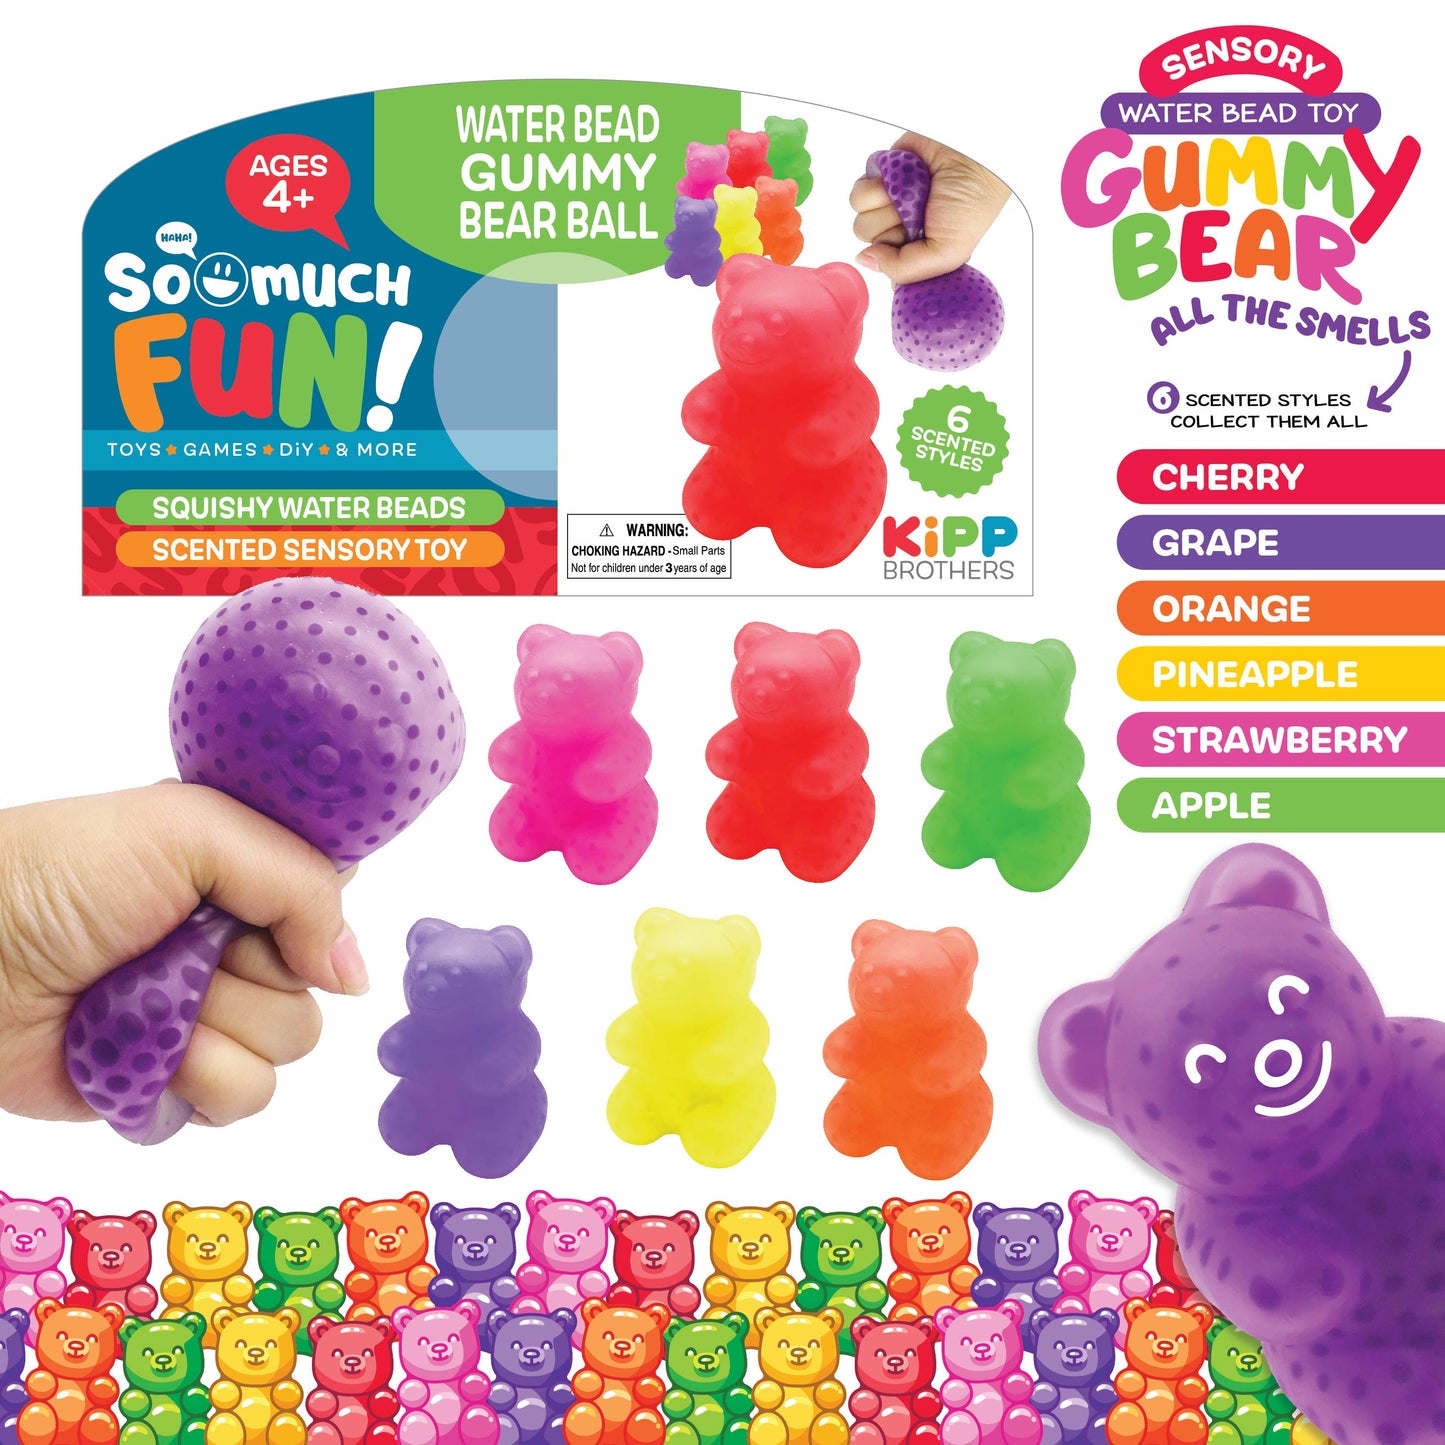 ITEM NUMBER 023355 SCENTED GUMMY BEAR WATER BEADBALL 12 PIECES PER PACK